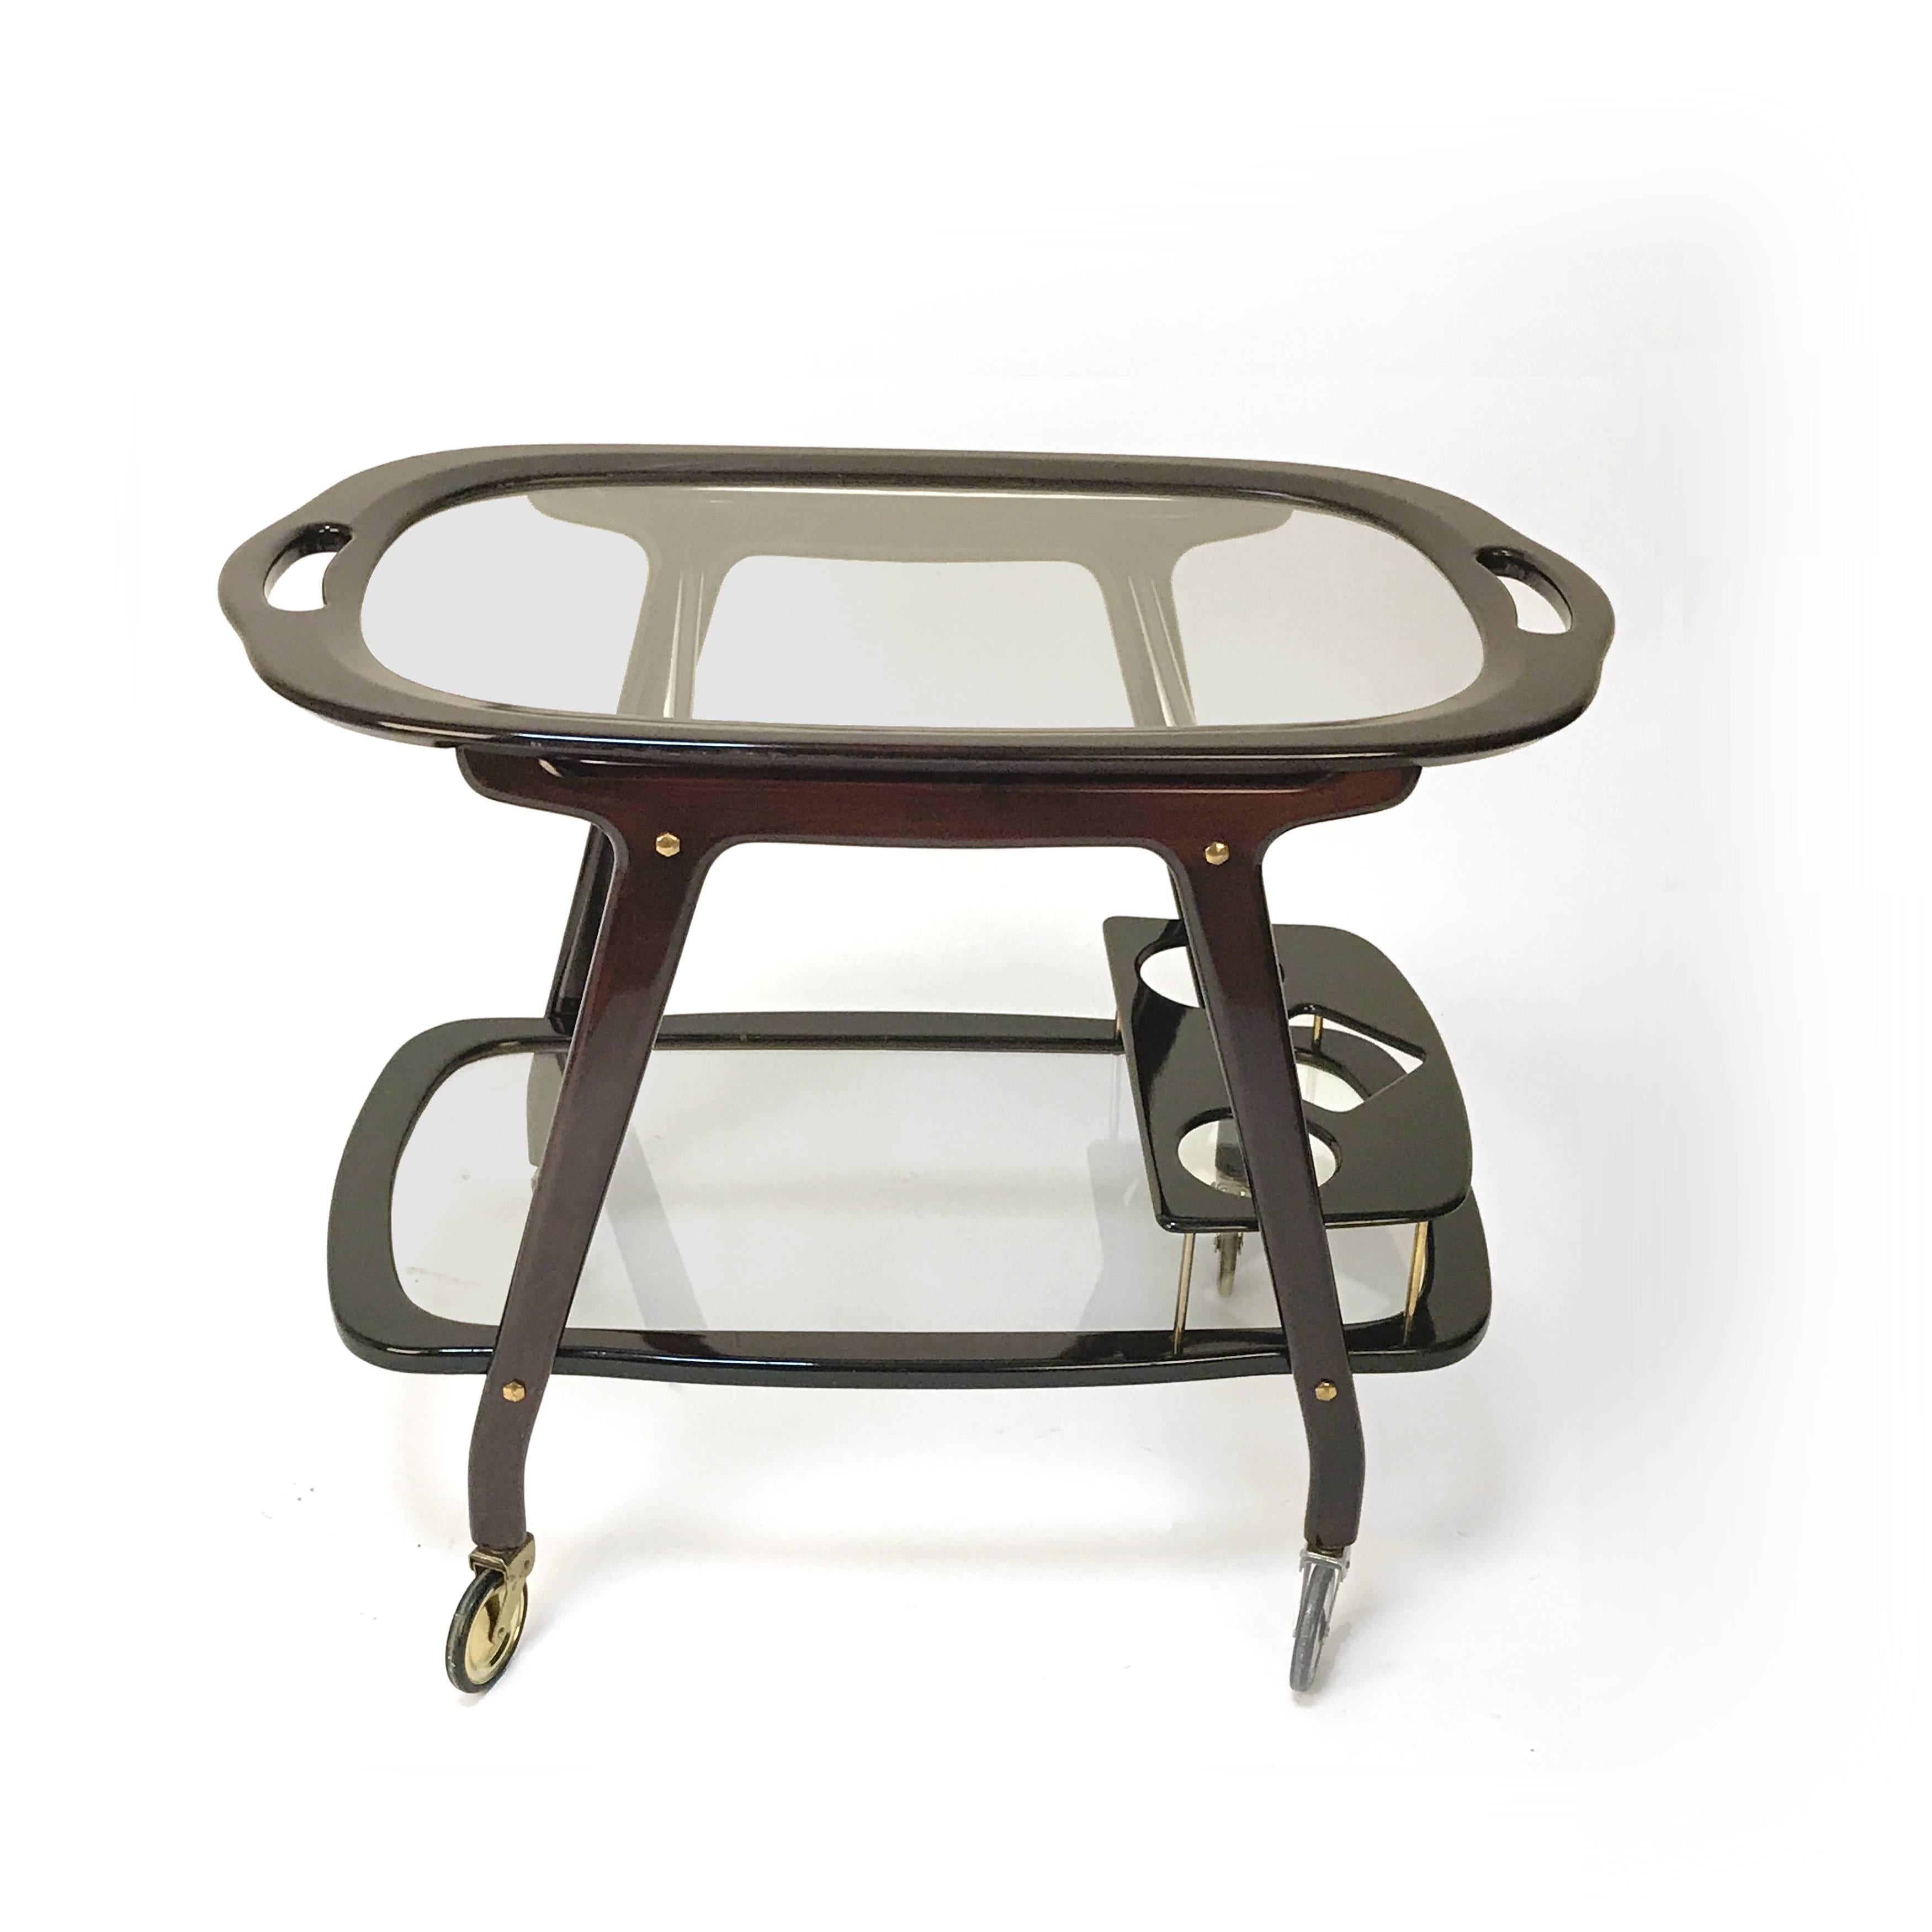 Italian trolley designed by Cesare Lacca in the 1950s
in mahogany.
The lower shelf is equipped with a bottle holder, the upper shelf can be removed as a tray. Professionally restored.